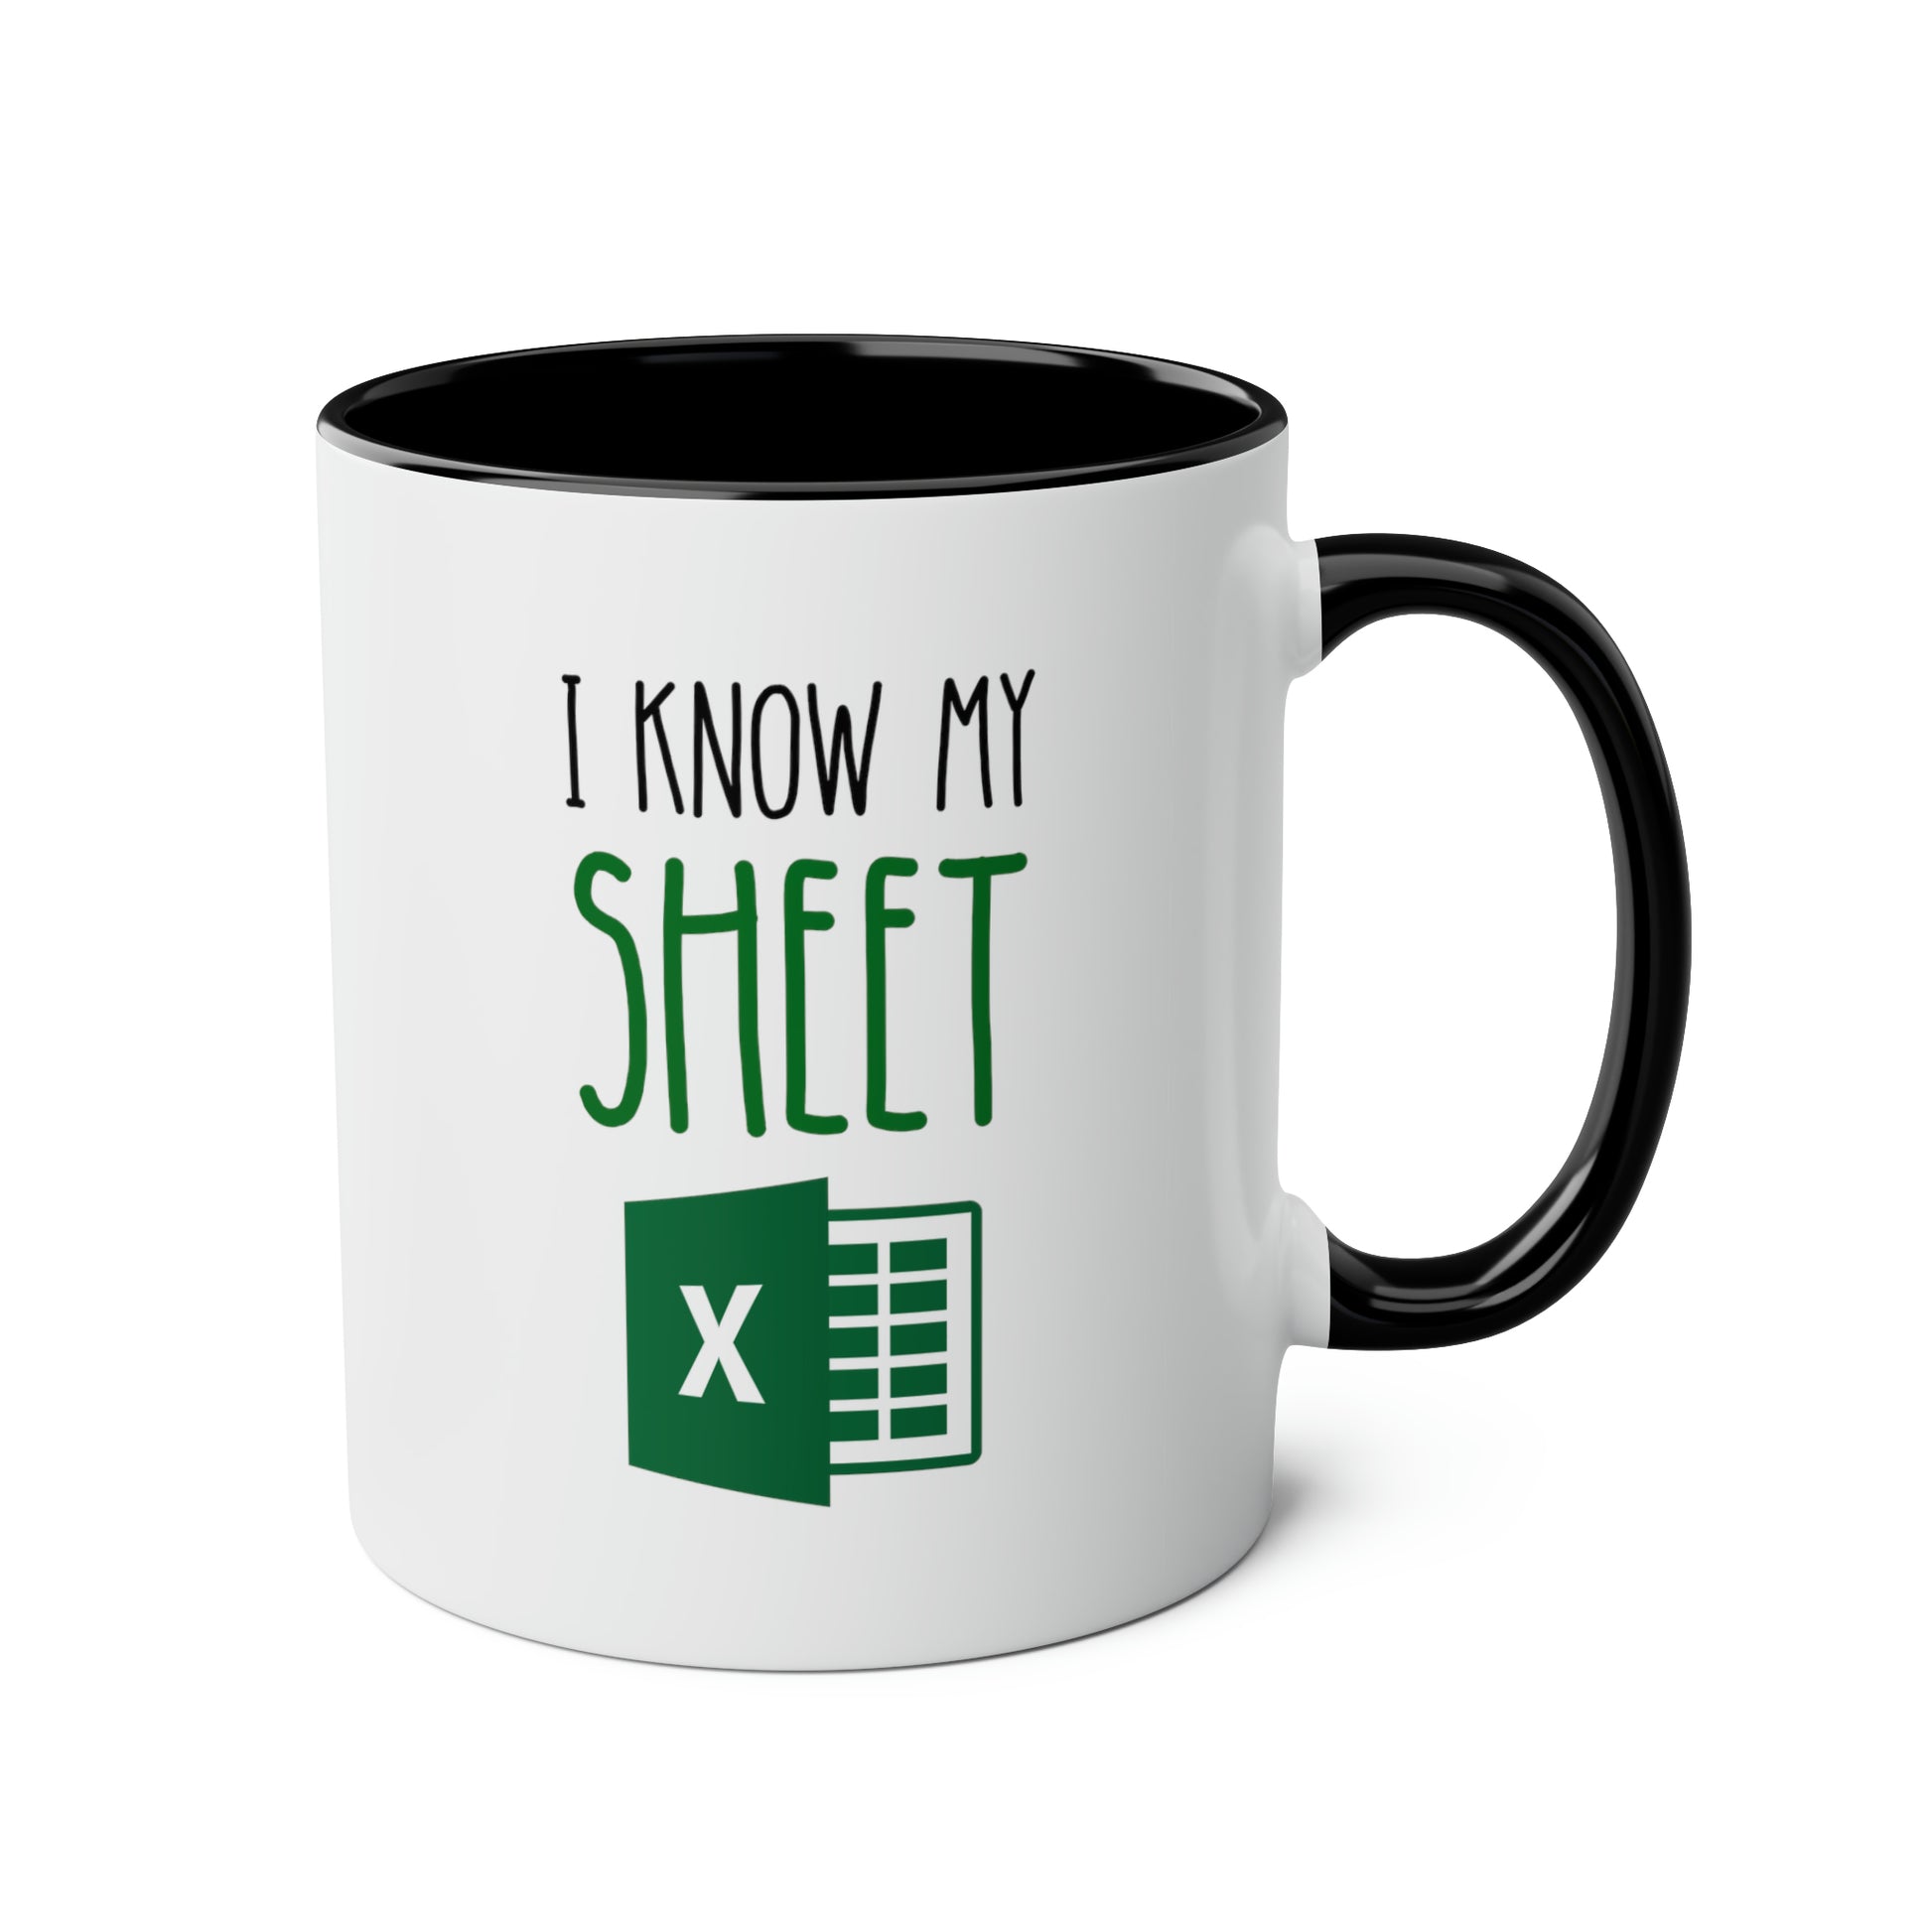 I Know My Sheet 11oz white with black accent funny large coffee mug gift for work colleague spreadsheet accountant office coworker excel waveywares wavey wares wavywares wavy wares